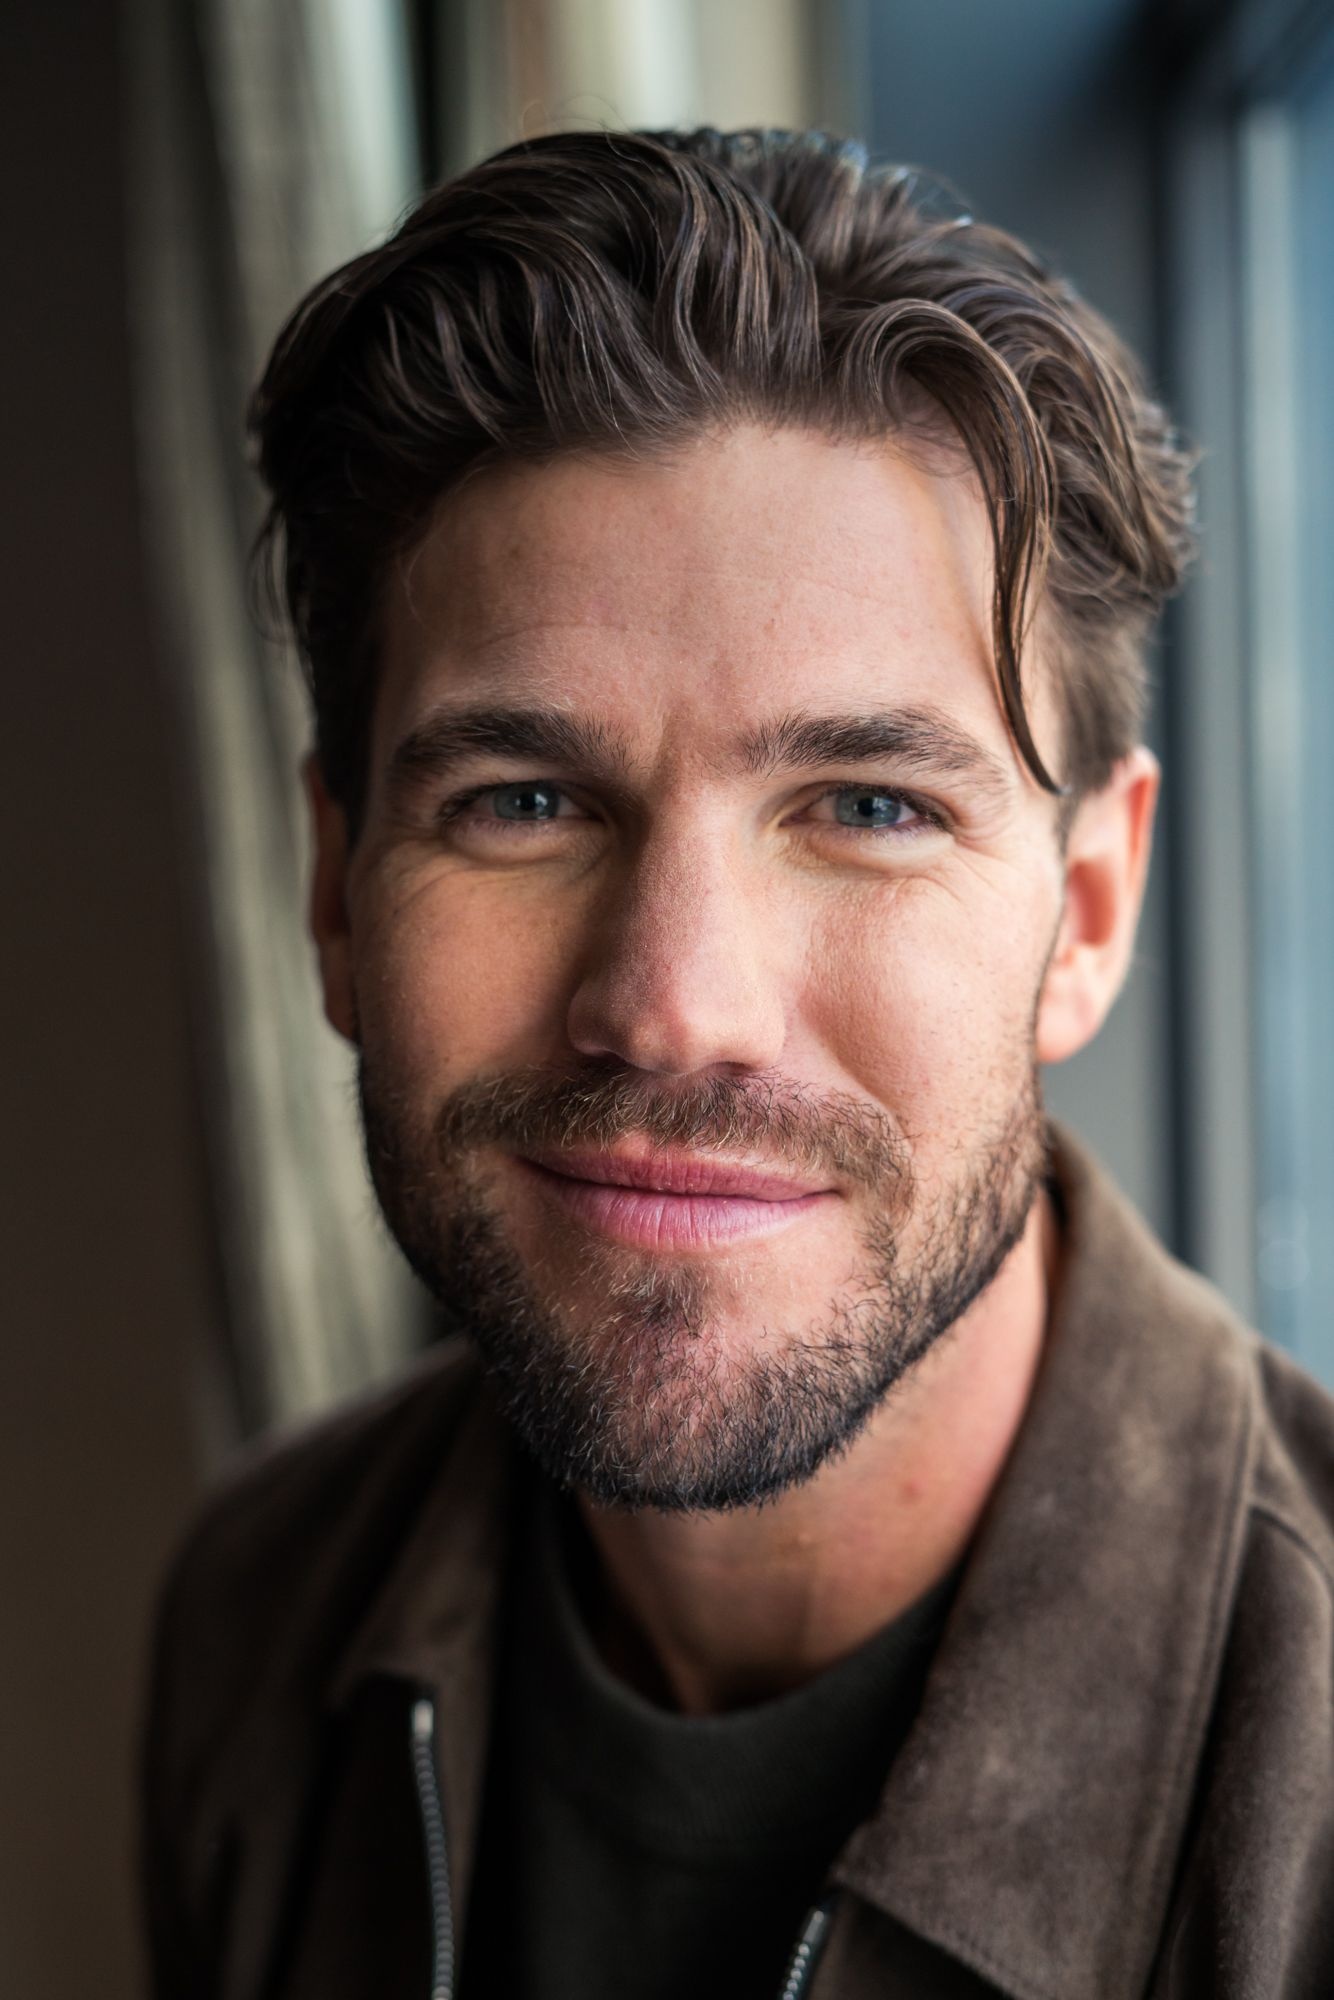 HD wallpaper, Life Story, Movies, 1340X2000 Hd Phone, Biography, Austin Stowell, Iphone Hd Austin Stowell Background Image